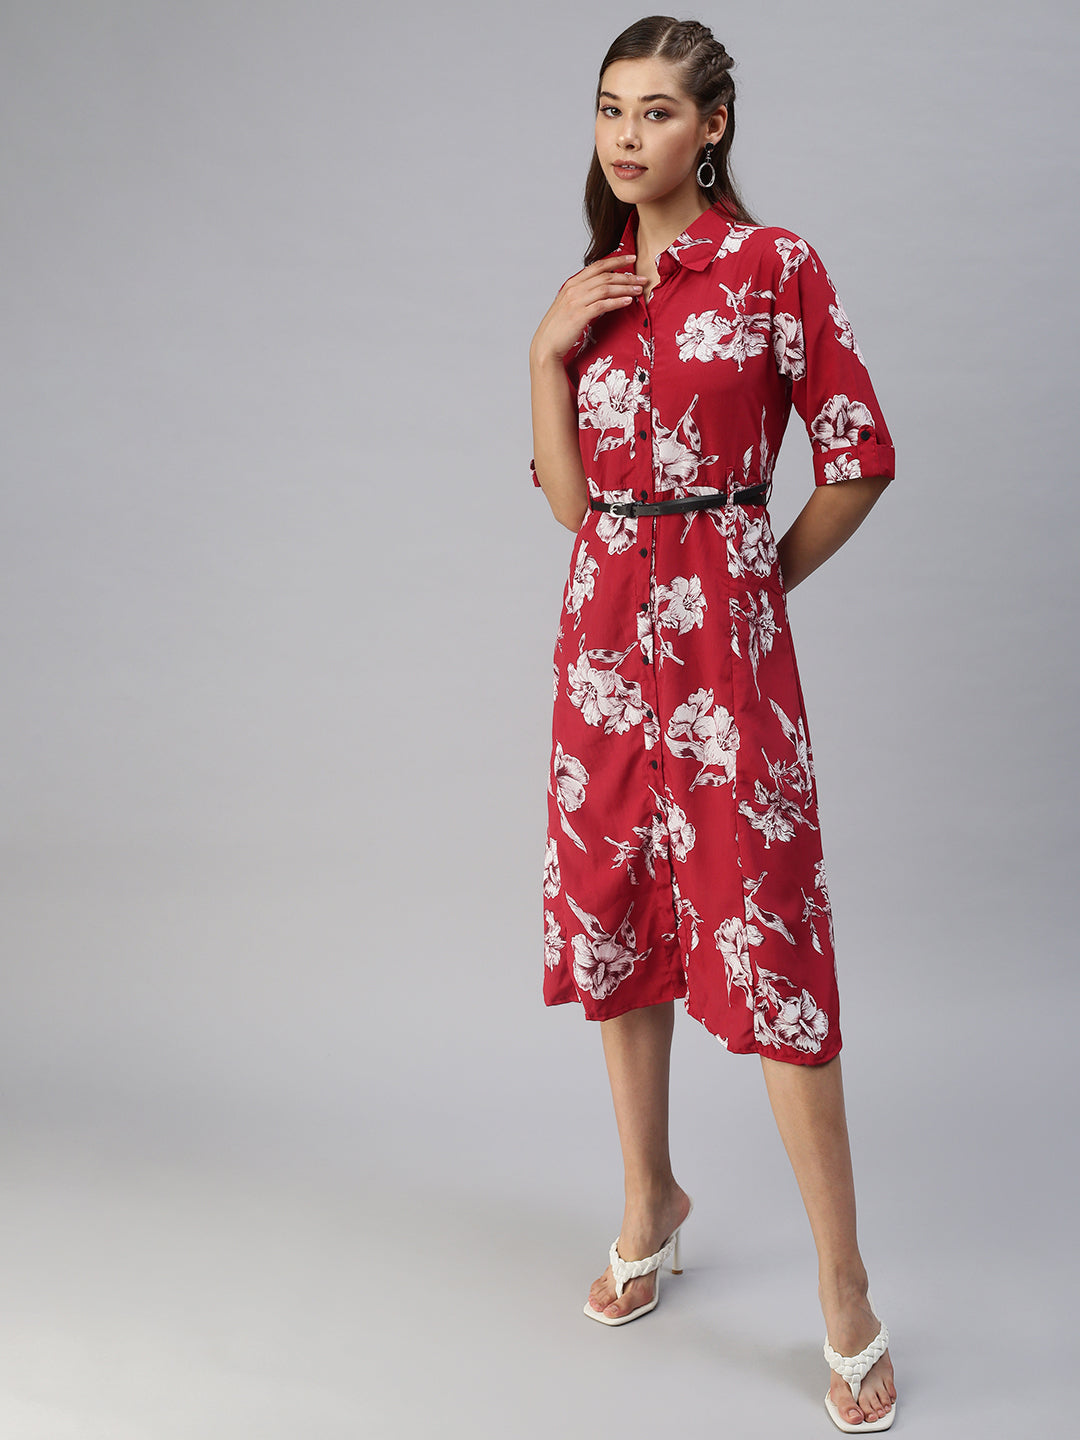 Women Printed Fit and Flare Red Dress